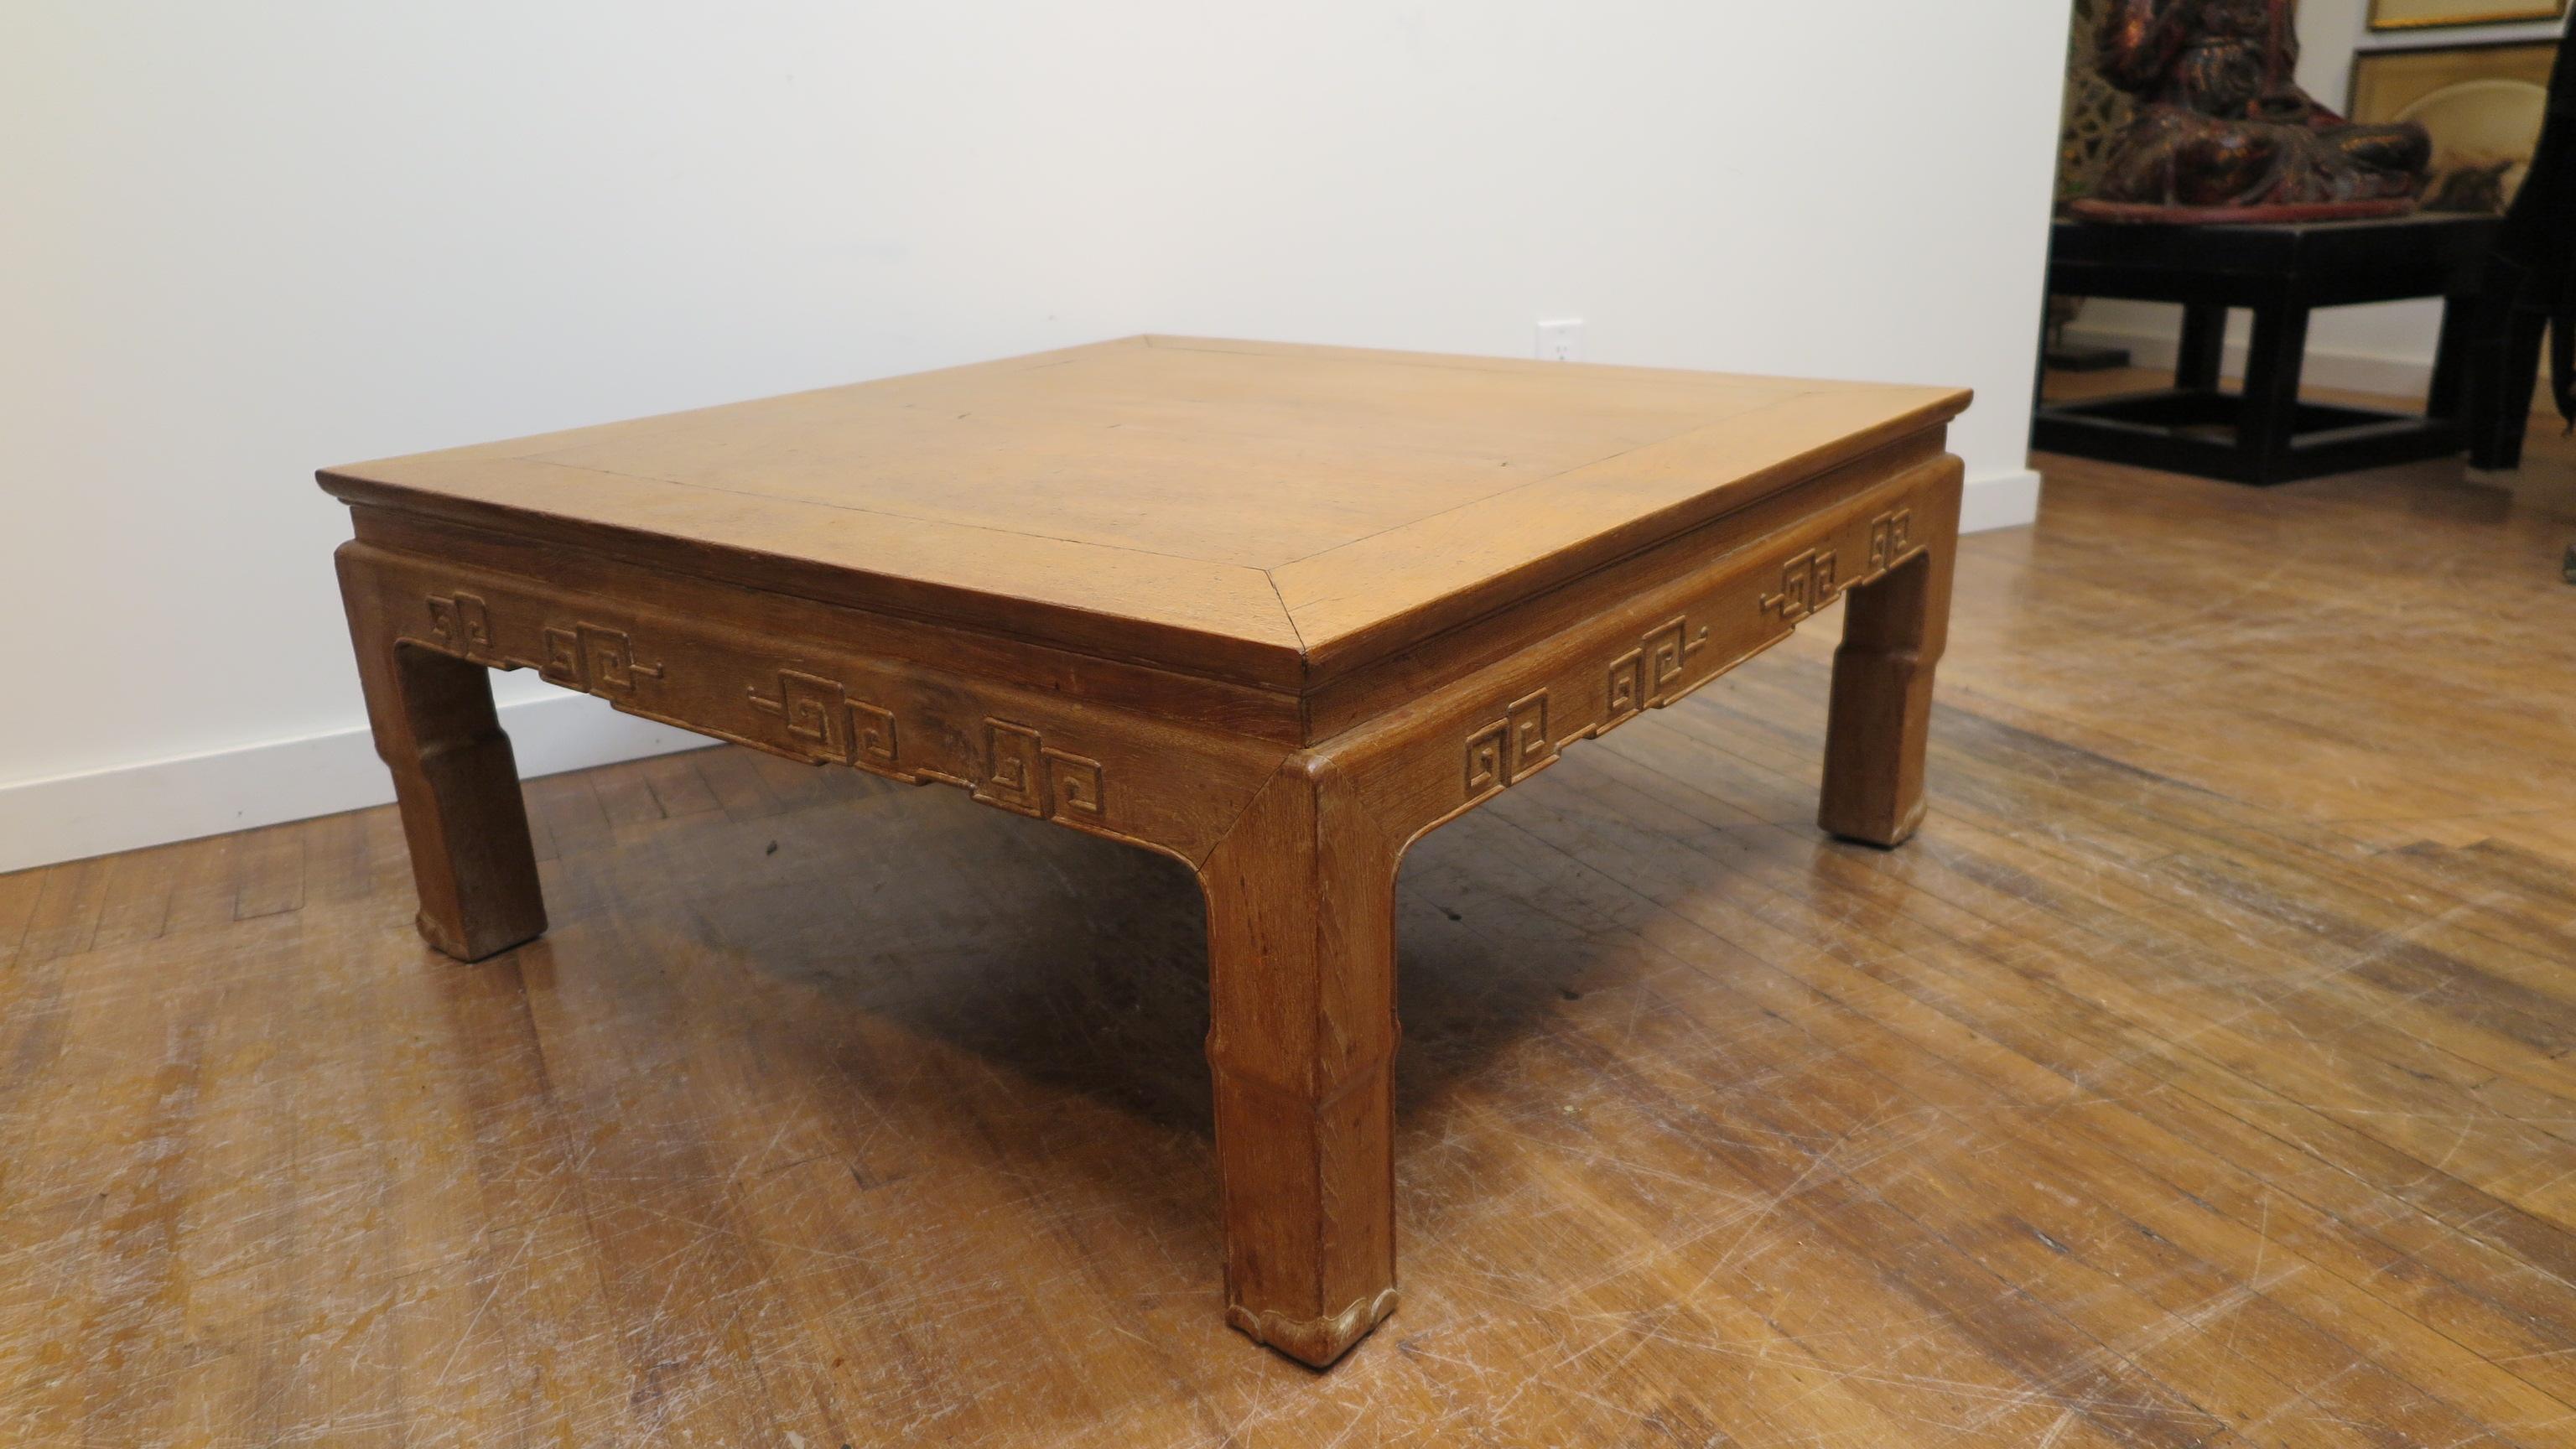 Chinese Huanghuali wood table, 20th century. This table was purchased in Hong Kong 1956 and shipped to the USA. From family of original owner. Huang refers to the older pieces of furniture made form the highest quality of Huali Wood 